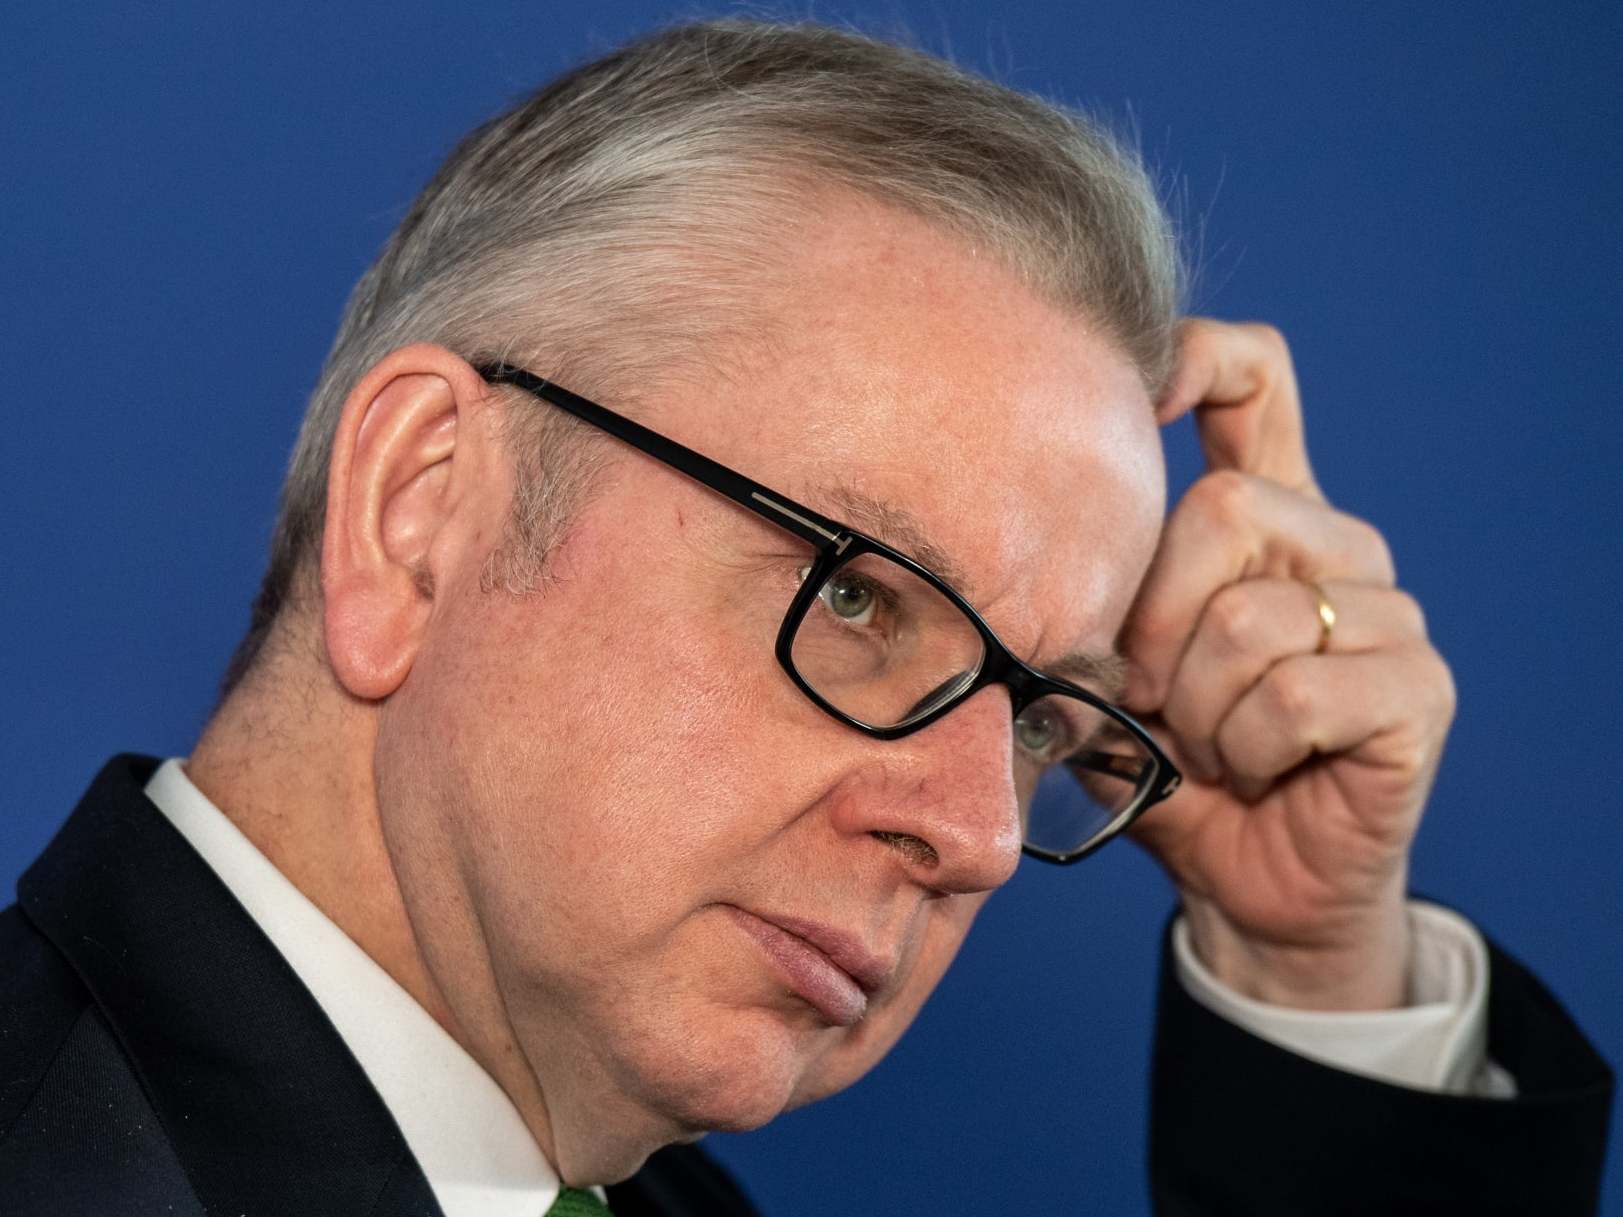 'I am not the prime minister's diary secretary,' Michael Gove says